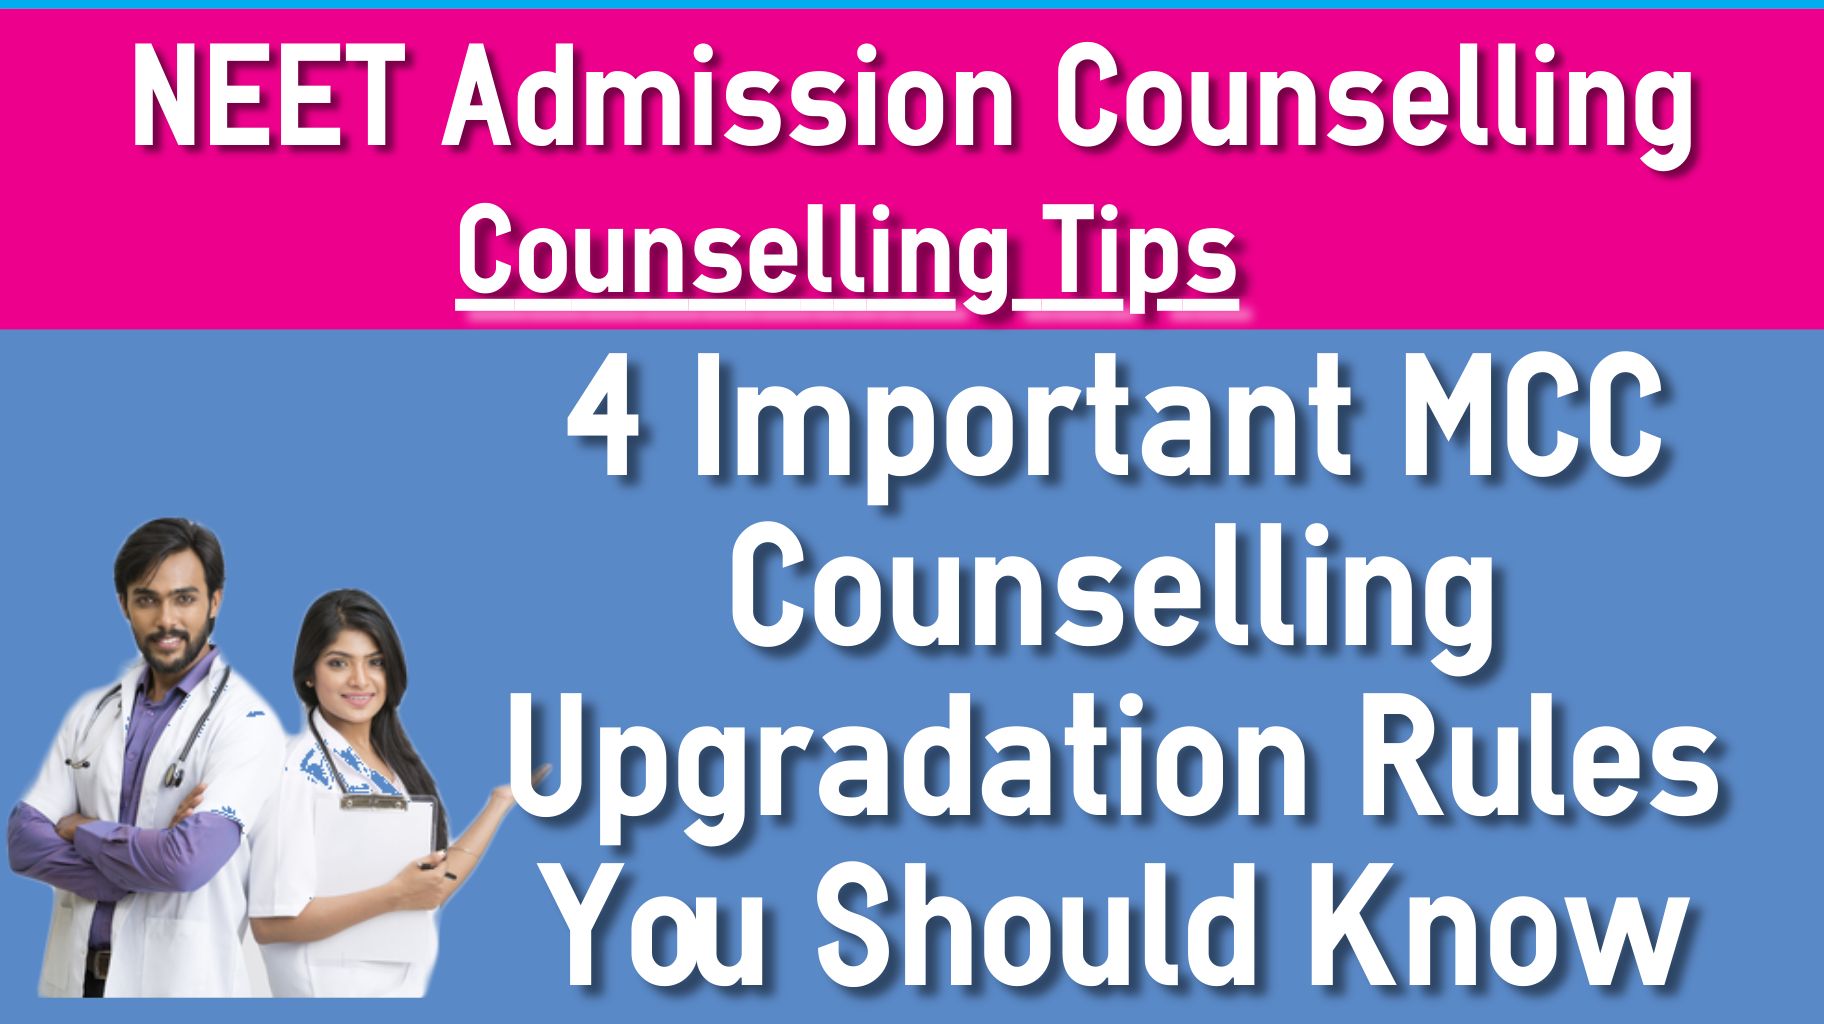 MCC Counselling Upgradation Rules